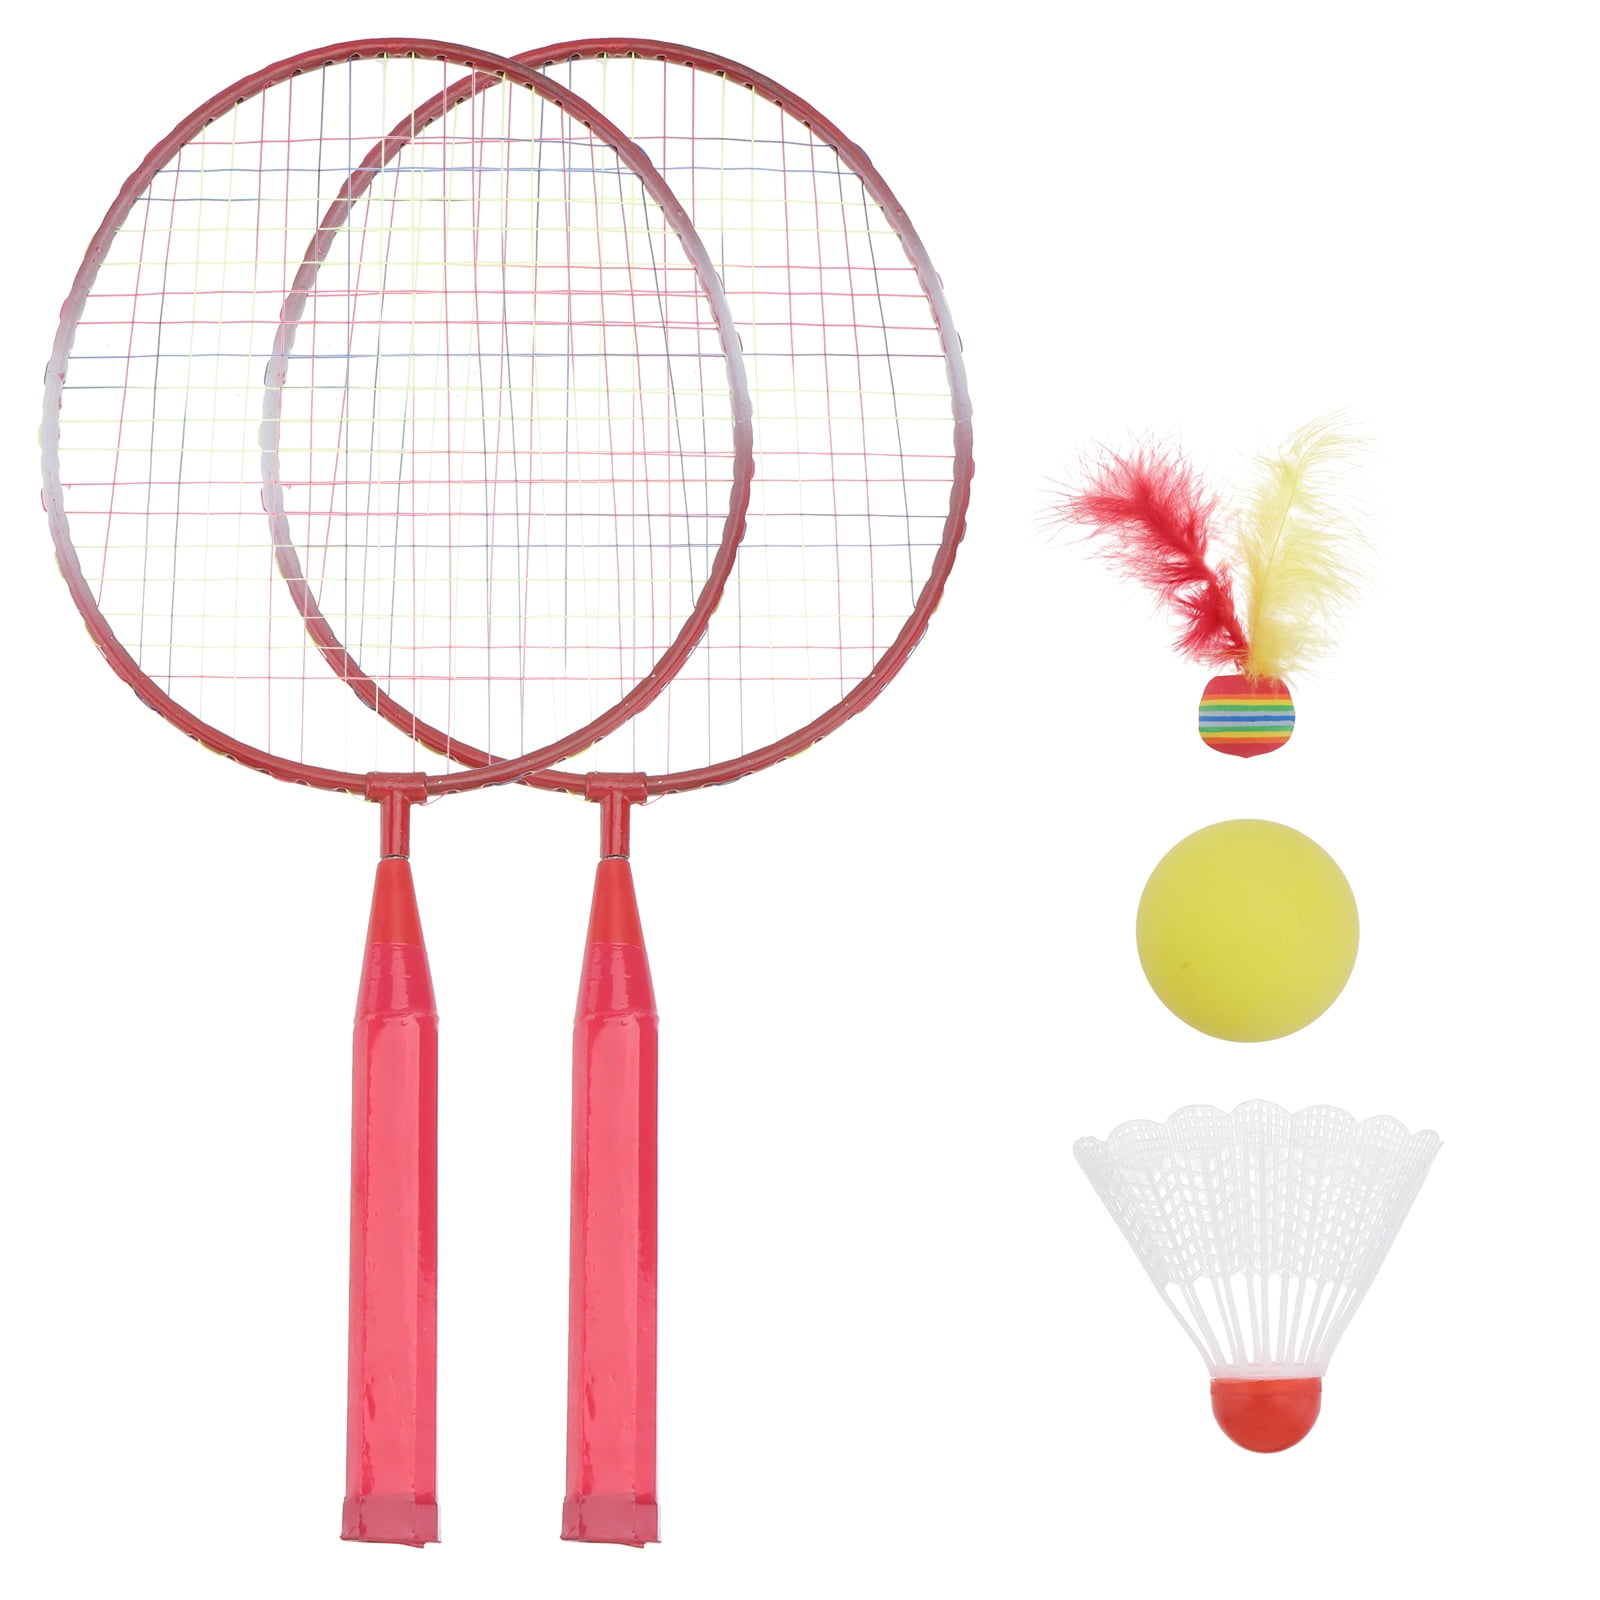 Including 4 Rackets, Details about    Badminton Rackets Set of 4 for Outdoor Backyard Games 